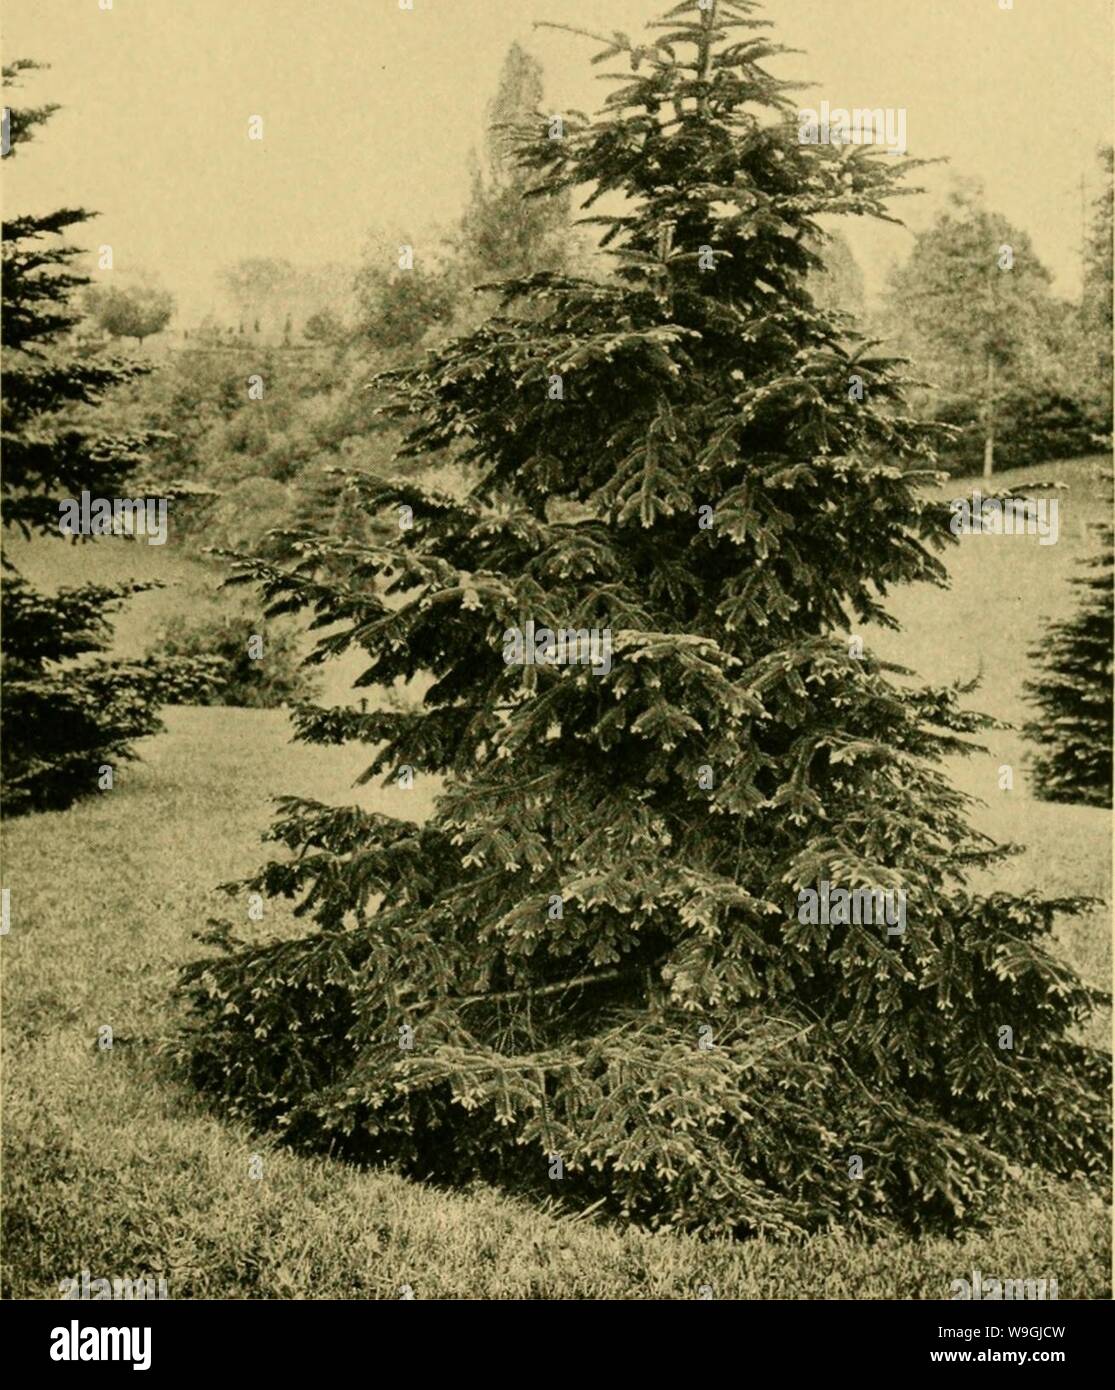 Archive image from page 248 of The cultivated evergreens; a handbook. The cultivated evergreens; a handbook of the coniferous and most important broad-leaved evergreens planted for ornament in the United States and Canada  cultivatedevergr00bail Year: 1923 ( p --'    K &gt;- « -  Platk XXV'I. Good young plant of Algerian fir (Abies numidicd) Stock Photo